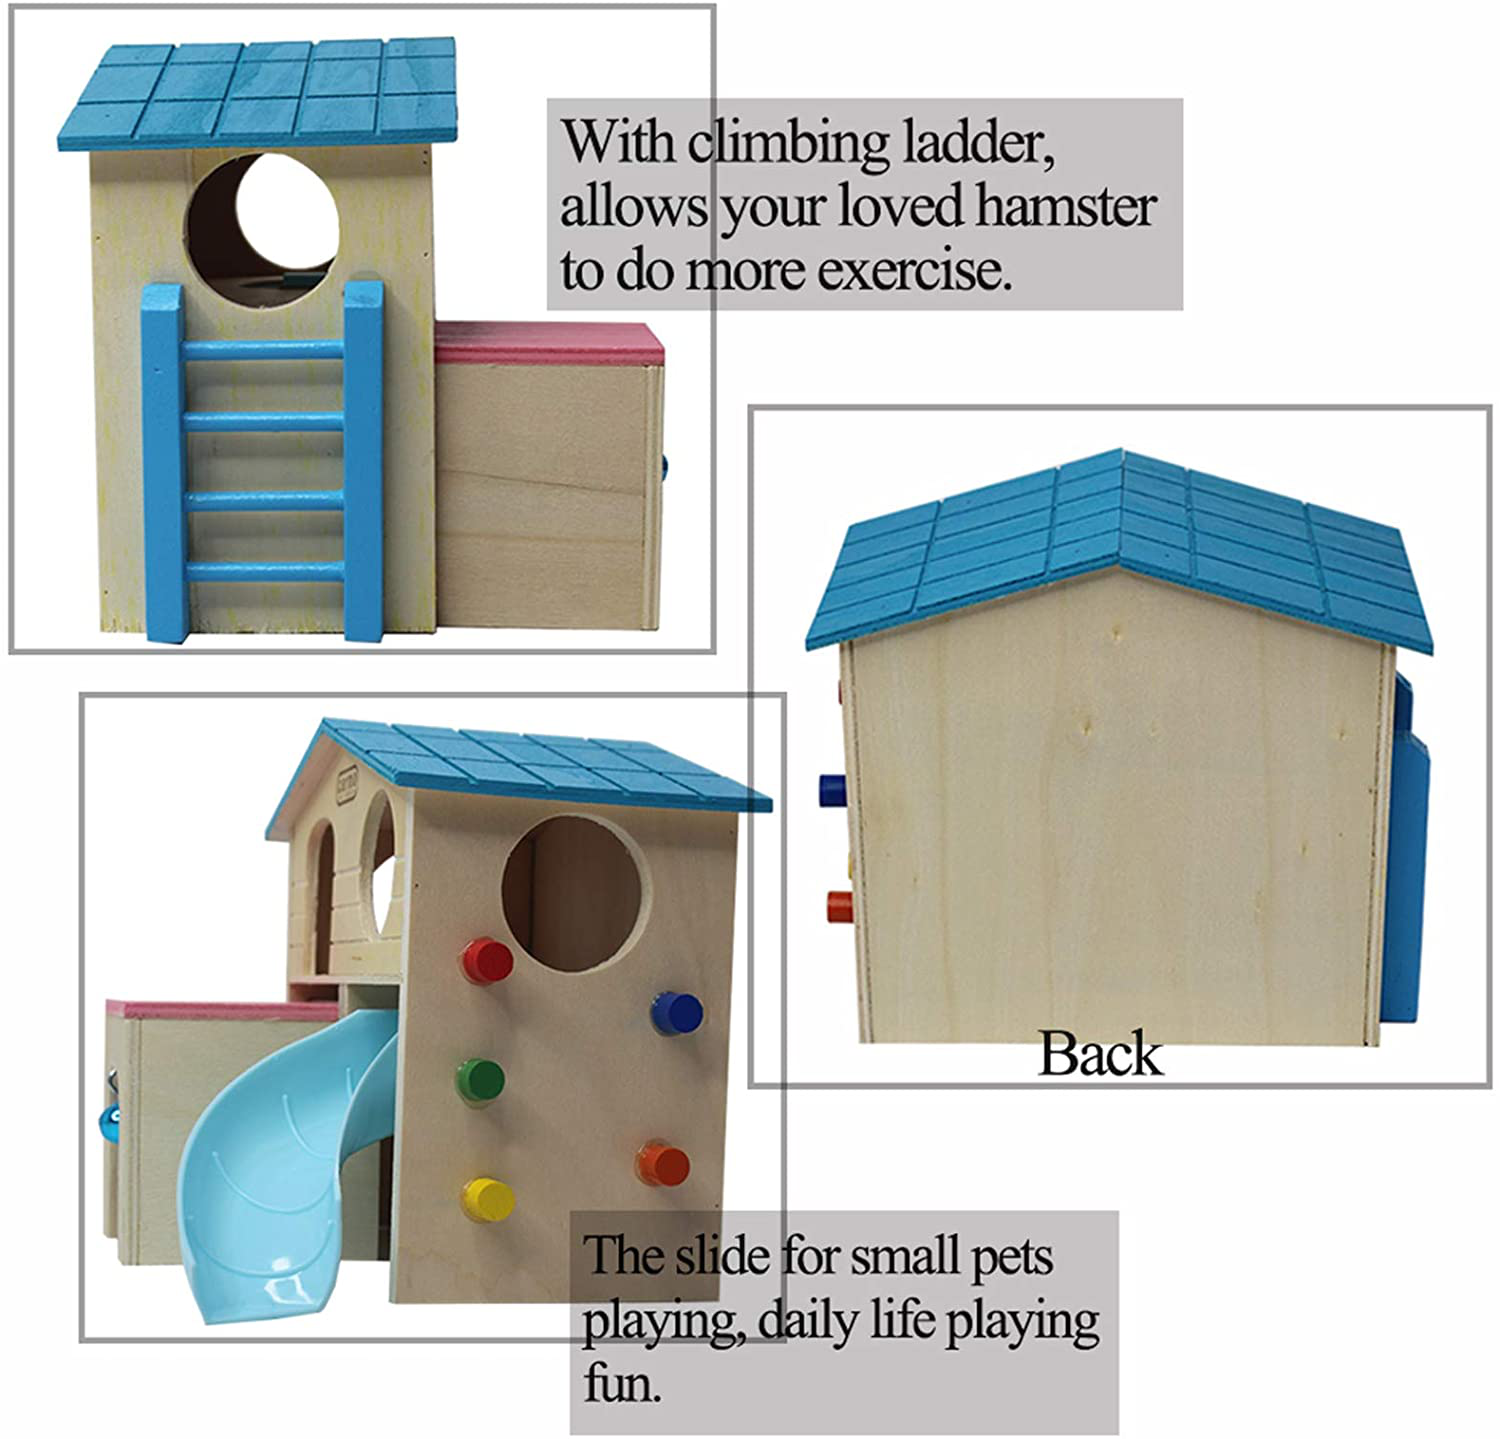 Kathson Pet Small Animal Hideout Hamster House with Funny Climbing Ladder Slide Wooden Hut Play Toys Chews for Small Animals like Dwarf Hamster and Mouse